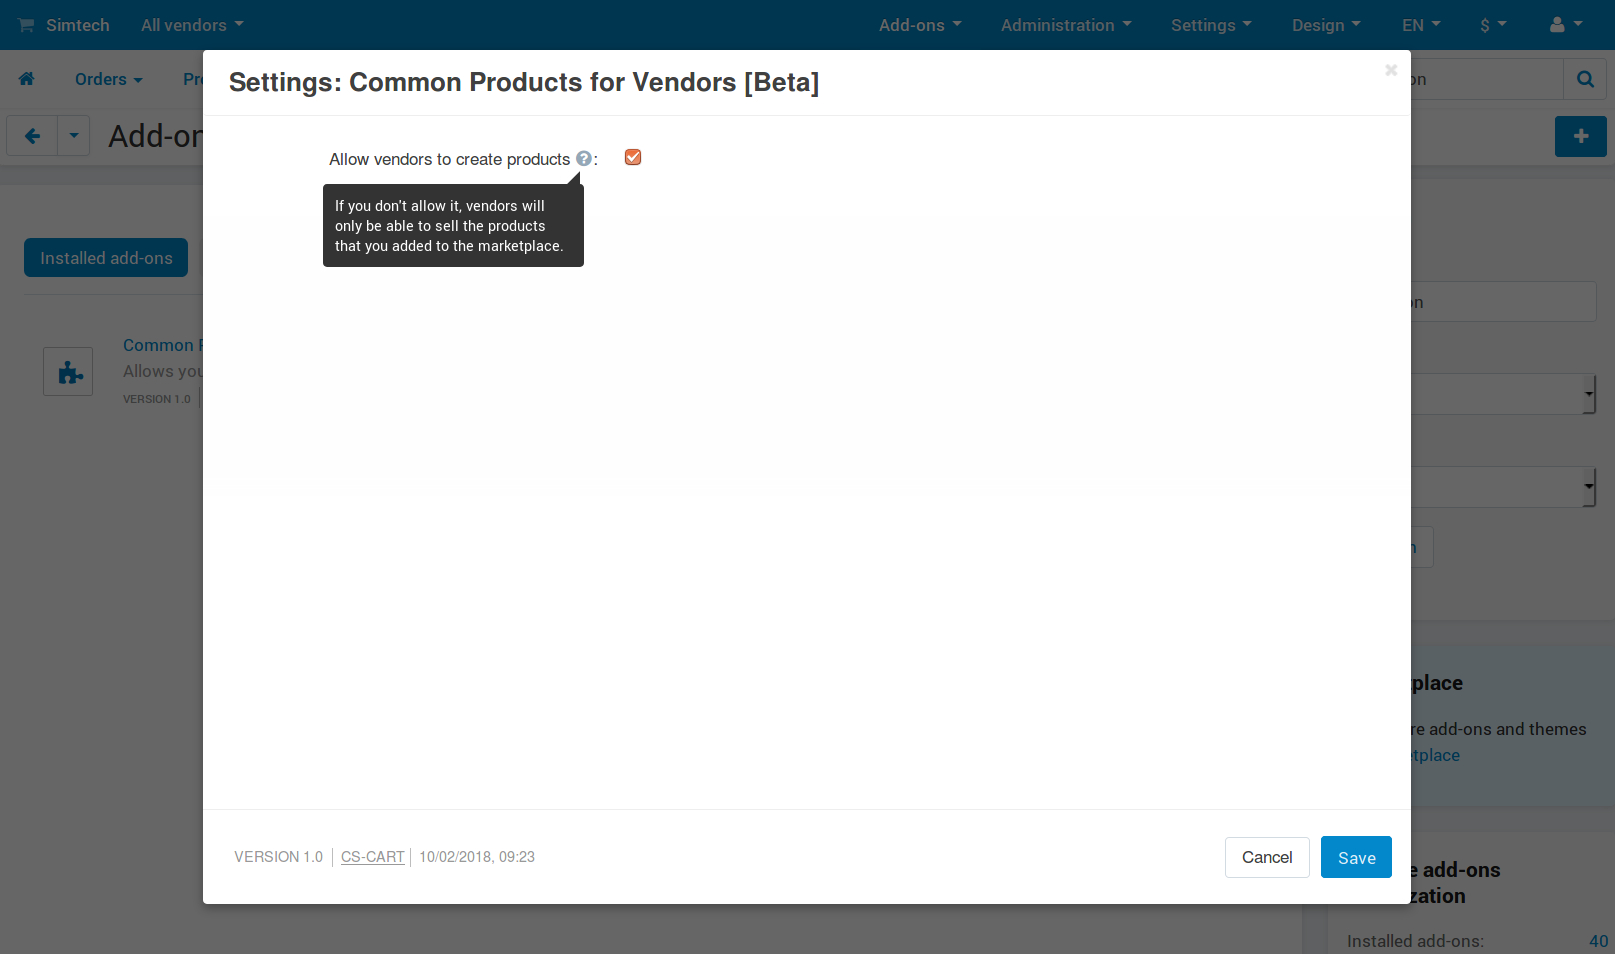 The settings of the "Common Products for Vendors" add-on.